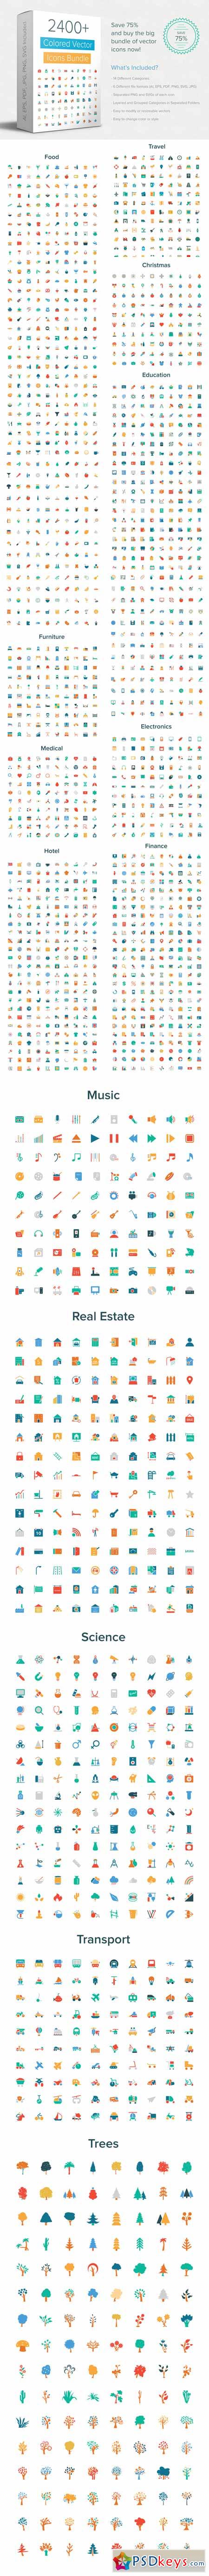 2400+ Colored Vector Icons Bundle 196710